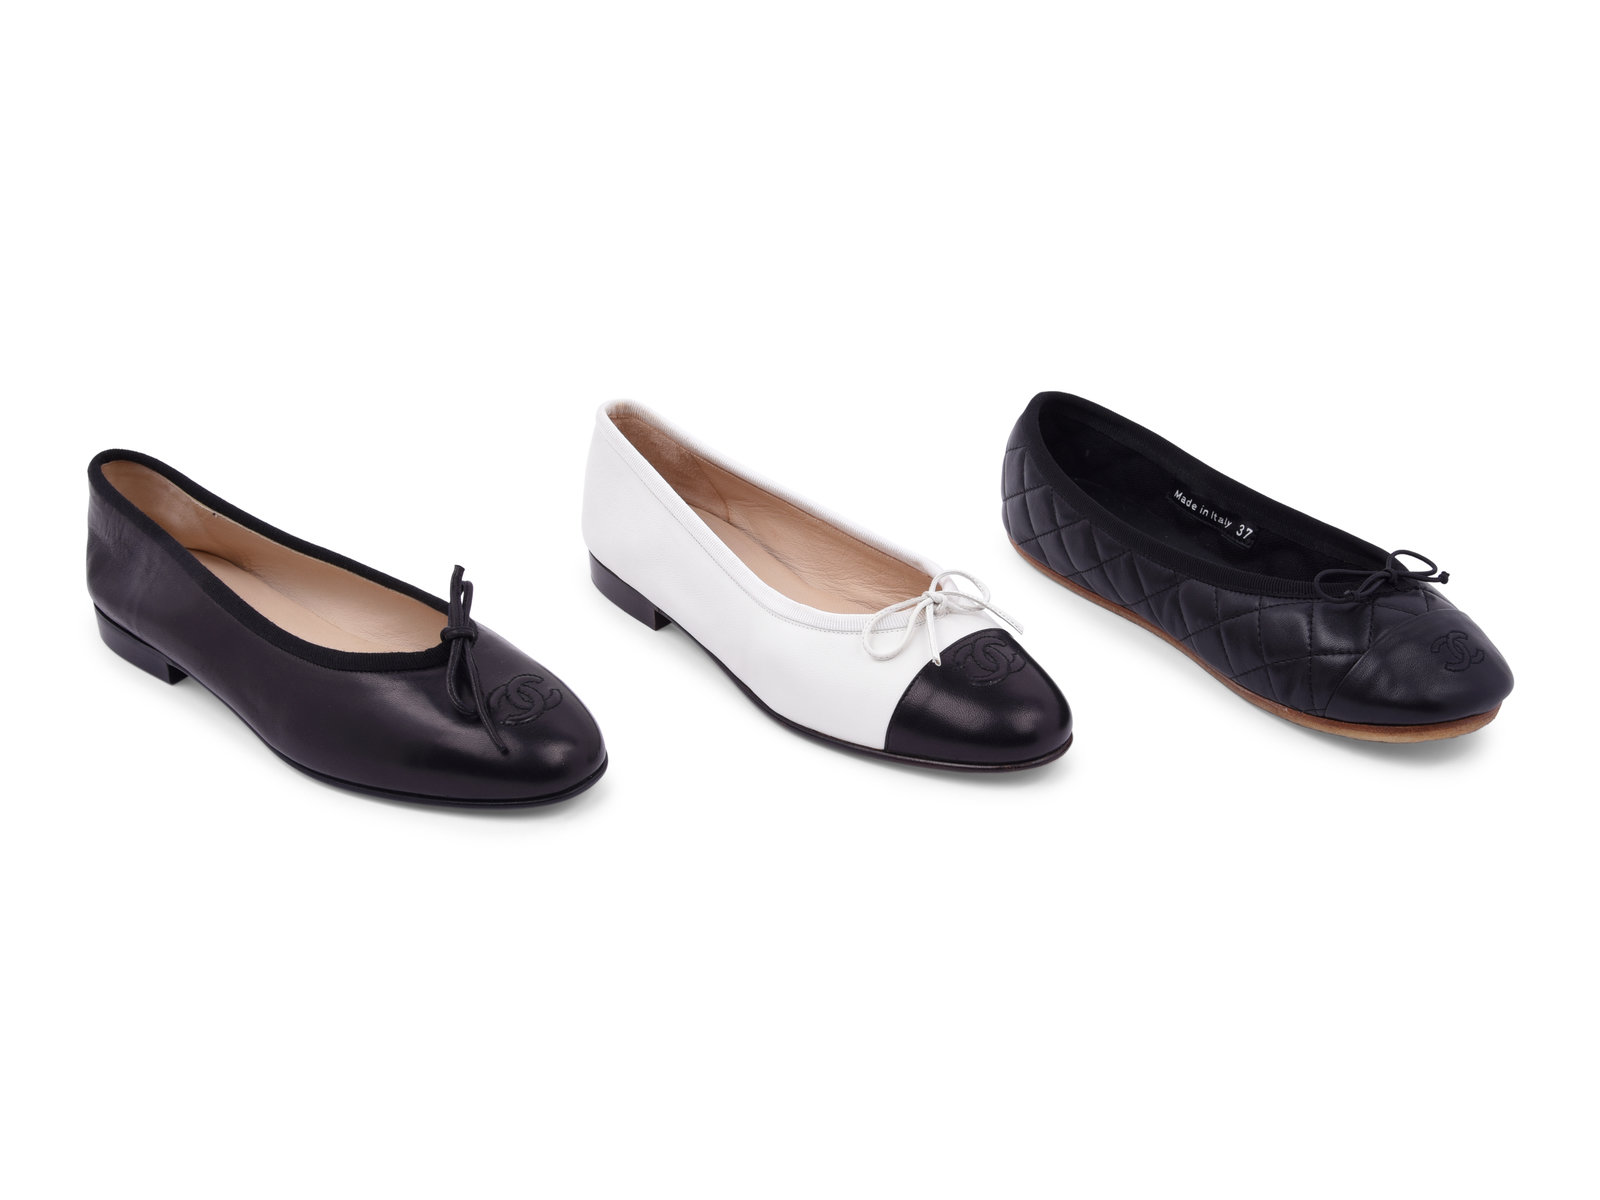 Three Pairs of Chanel Ballet Flats, 1996-2007